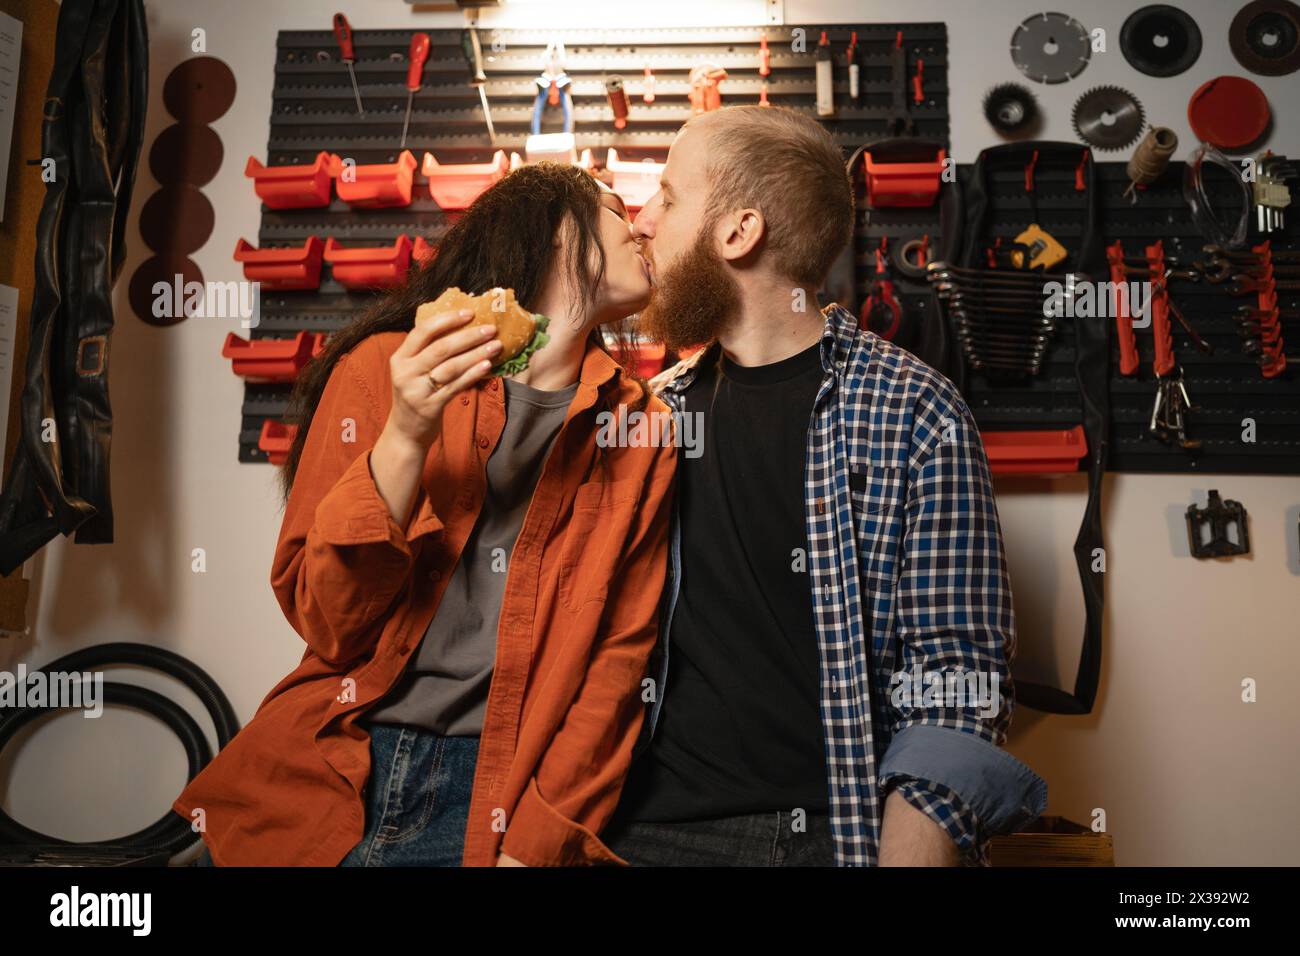 Kissing couple in garage, man and woman eating burgers and kissing after renovation in workshop. Stock Photo